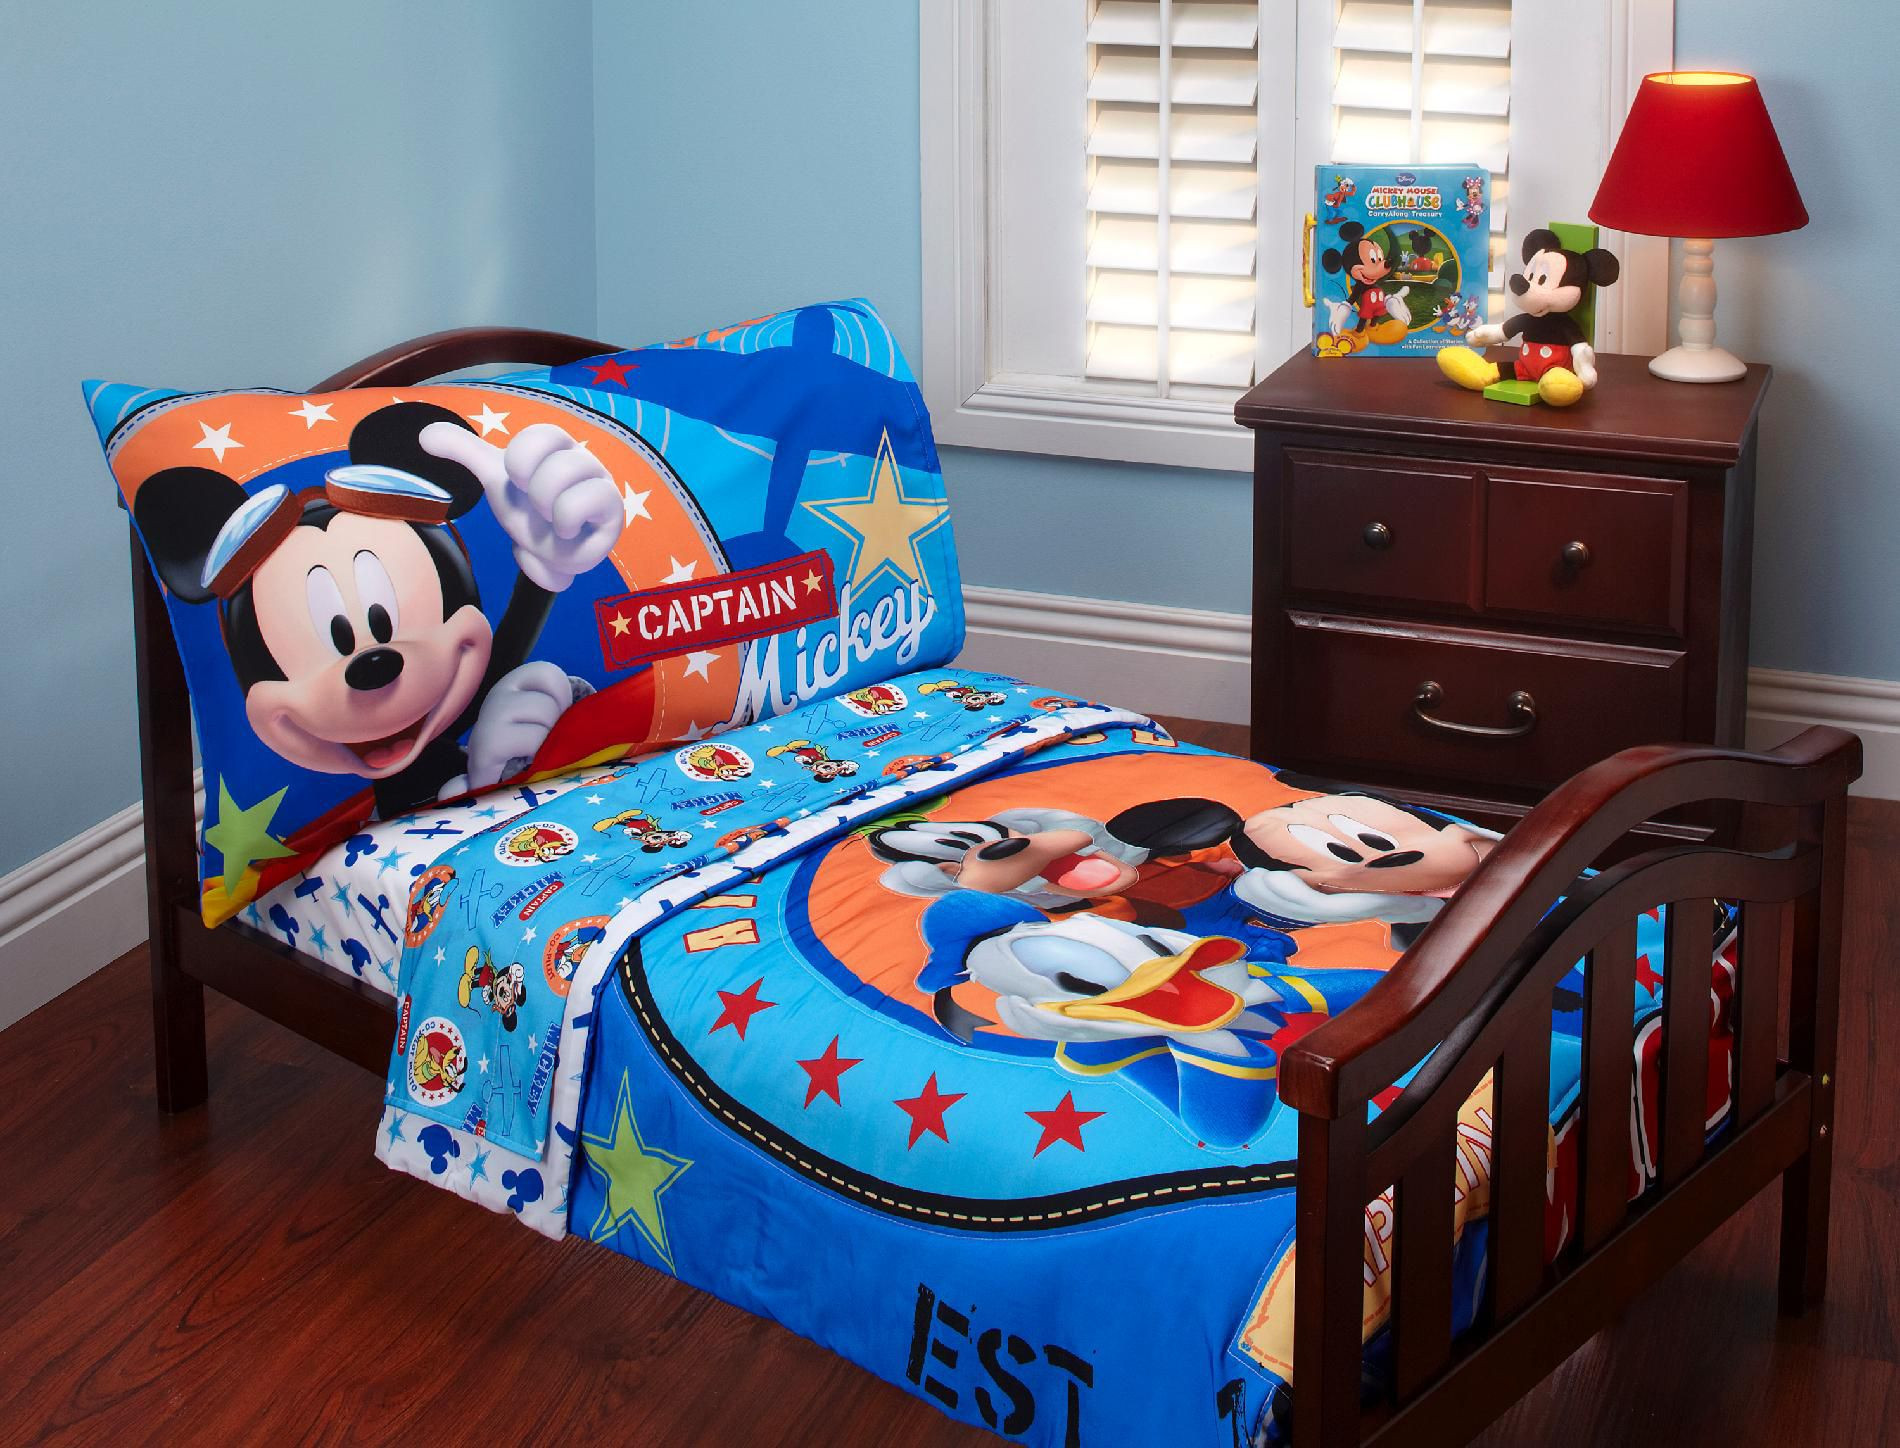 Toddler Bedroom Set For Boys
 Disney Baby Mickey Mouse Toddler Bed Set Baby Baby